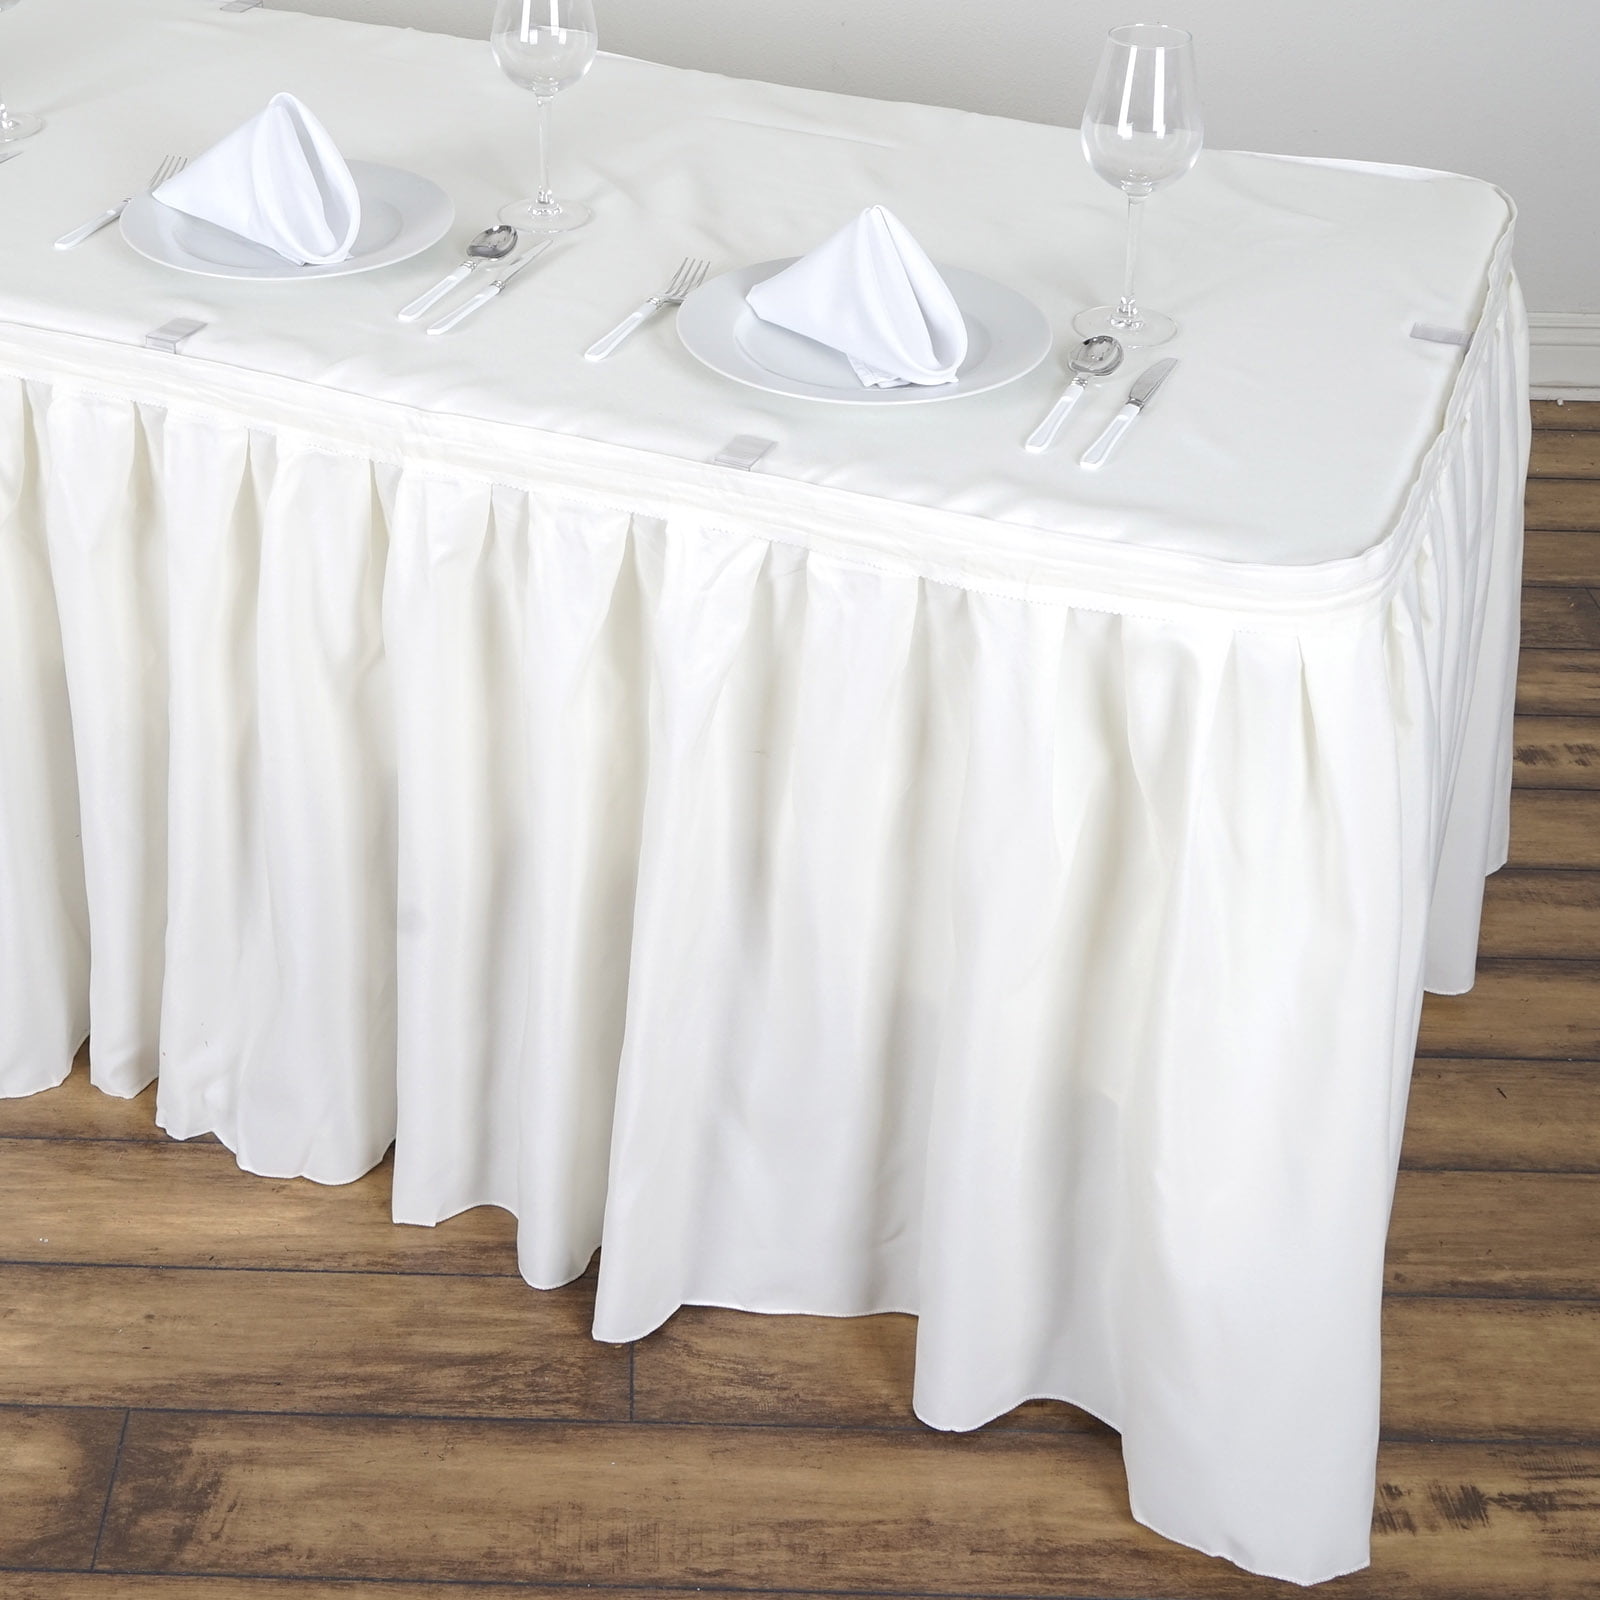 21 feet x 29" Polyester Banquet Table Skirt Wedding Party Linens Wholesale 